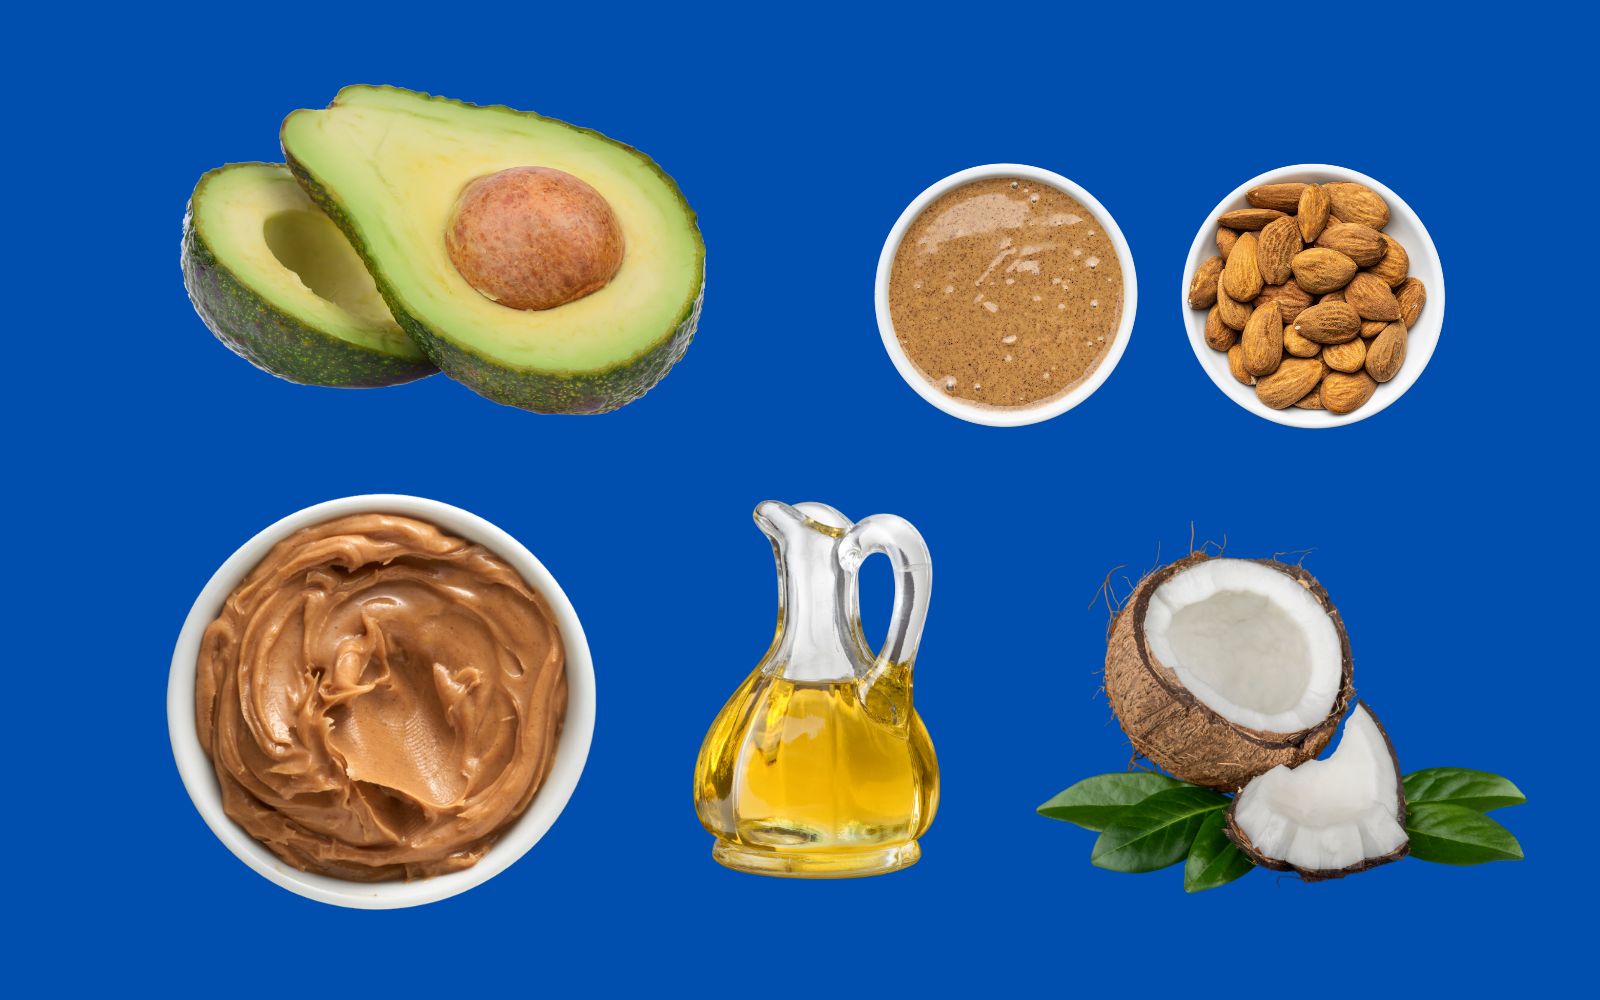 Examples of plant-based fats